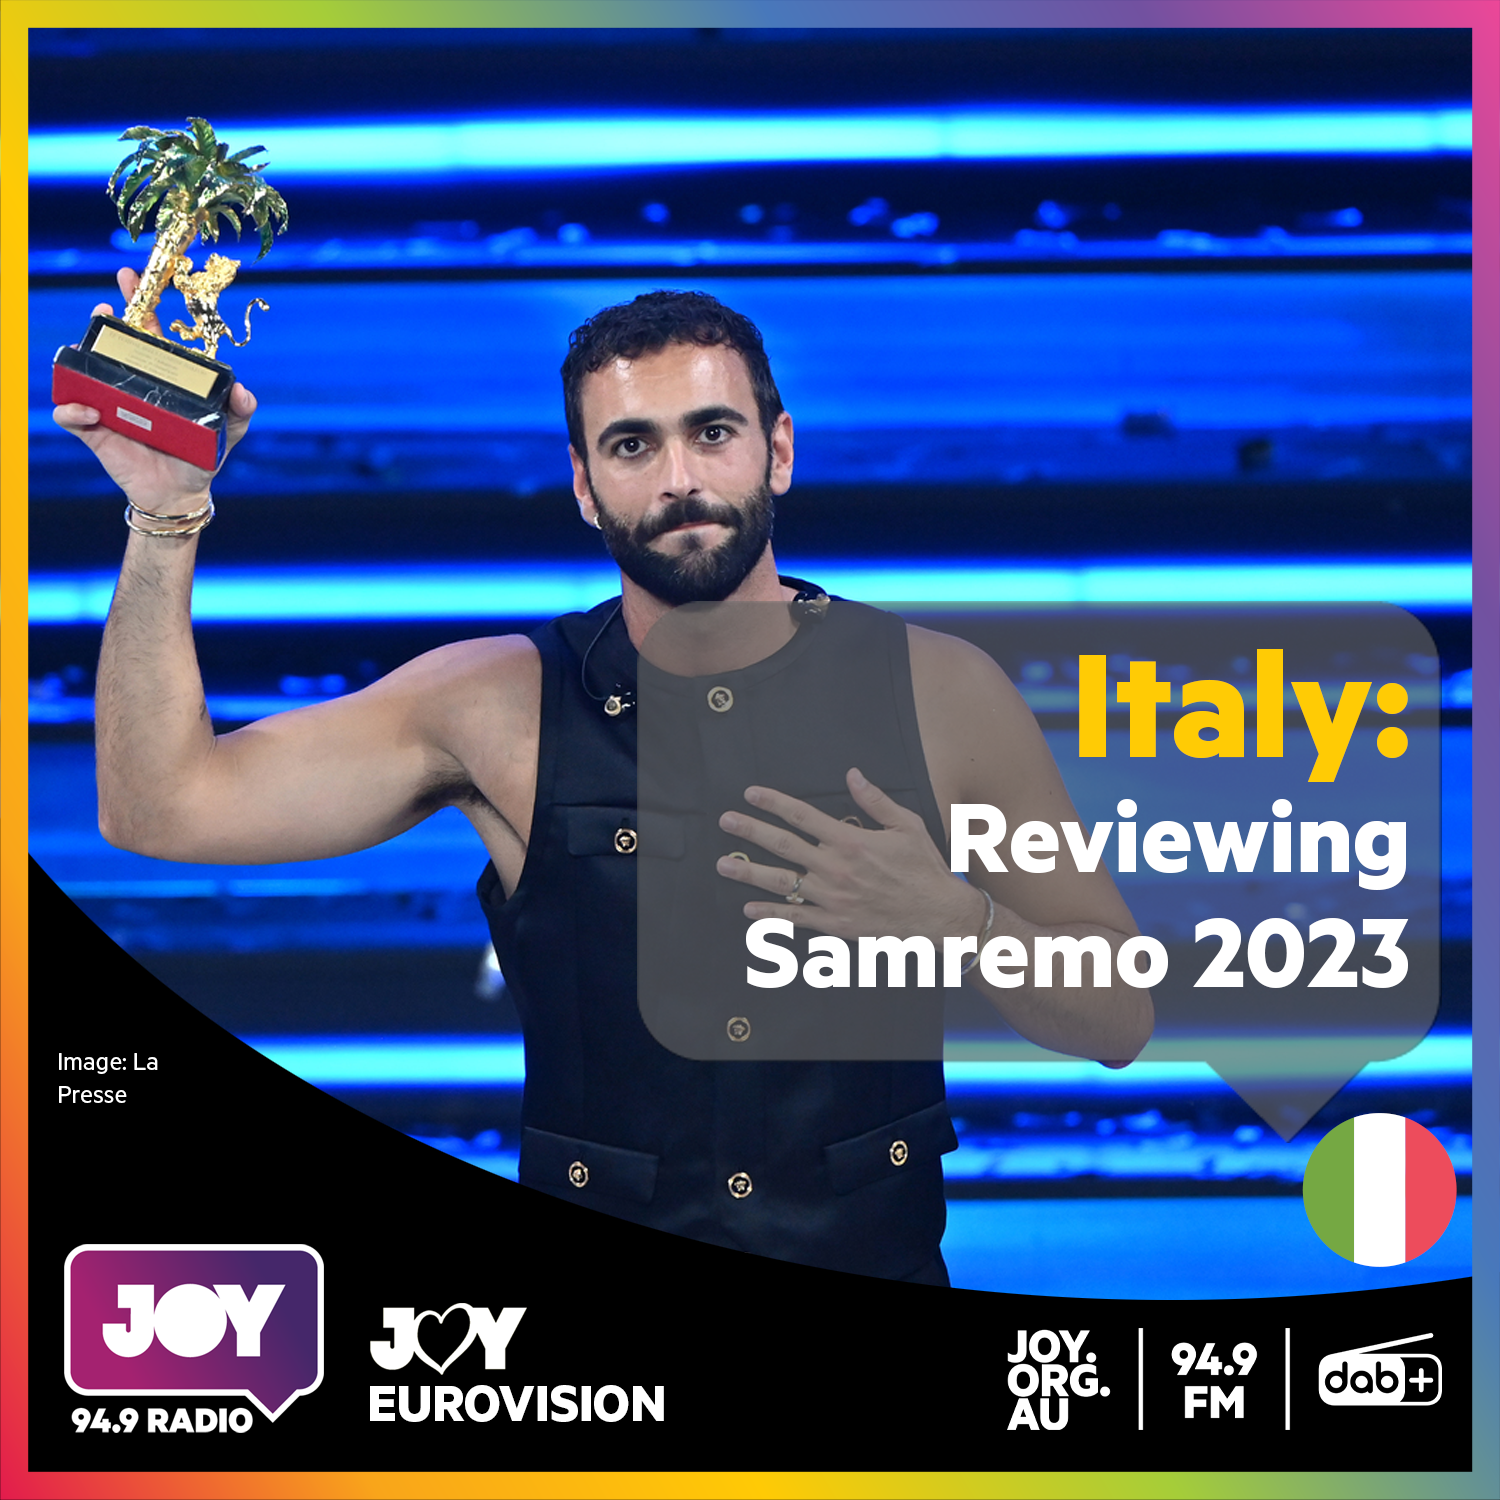 🇮🇹 Reviewing Sanremo 2023: How many lives does Italy have?